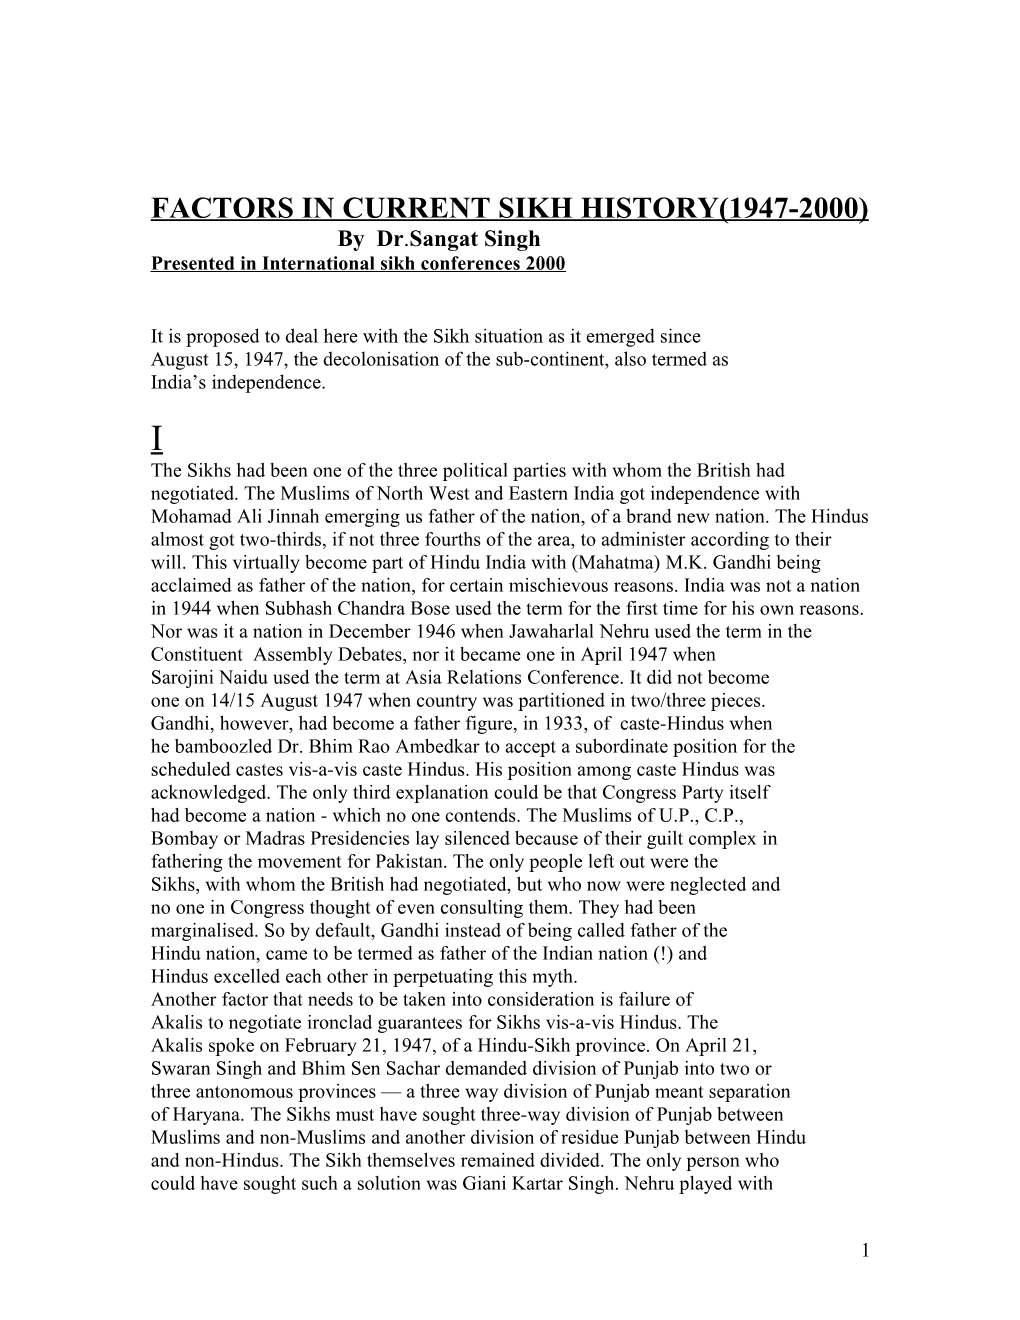 Factors in Current Sikh History